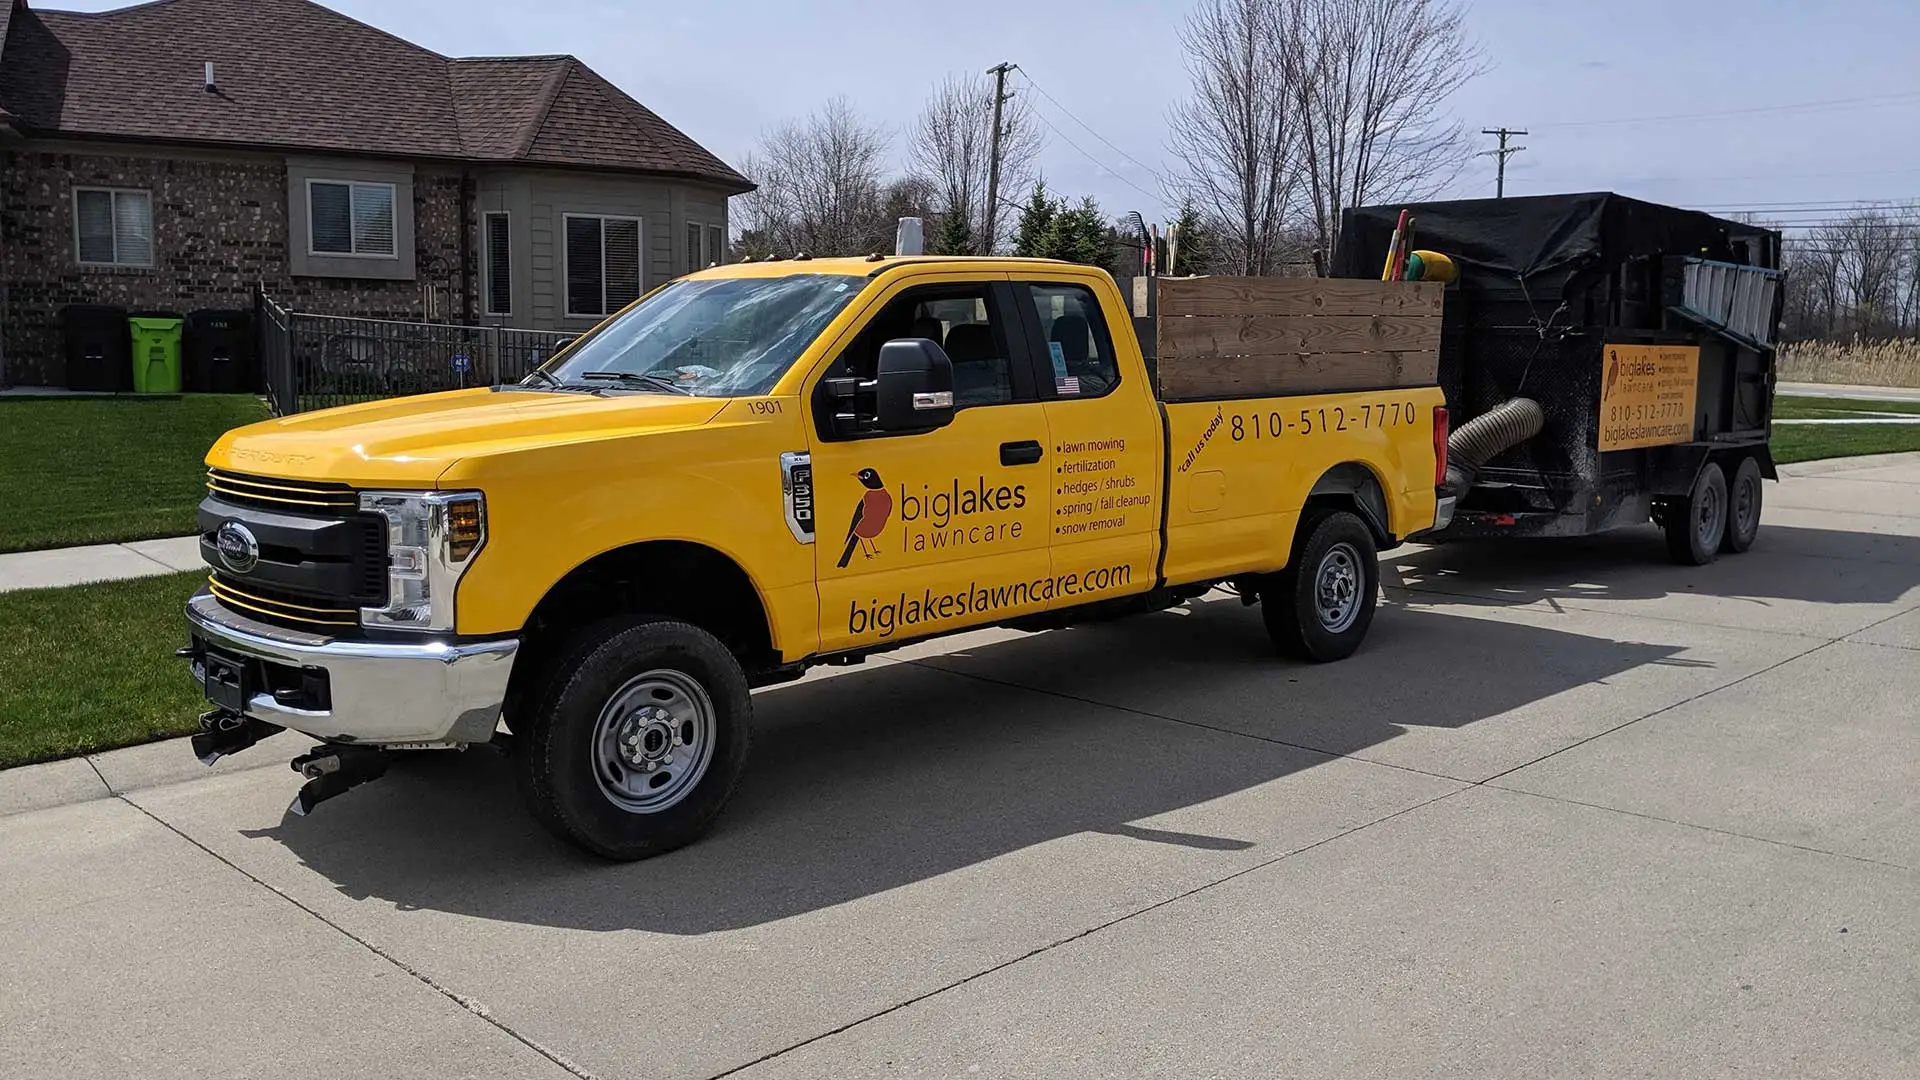 Big Lakes Lawncare lawn care and landscaping service truck in Washington, MI.